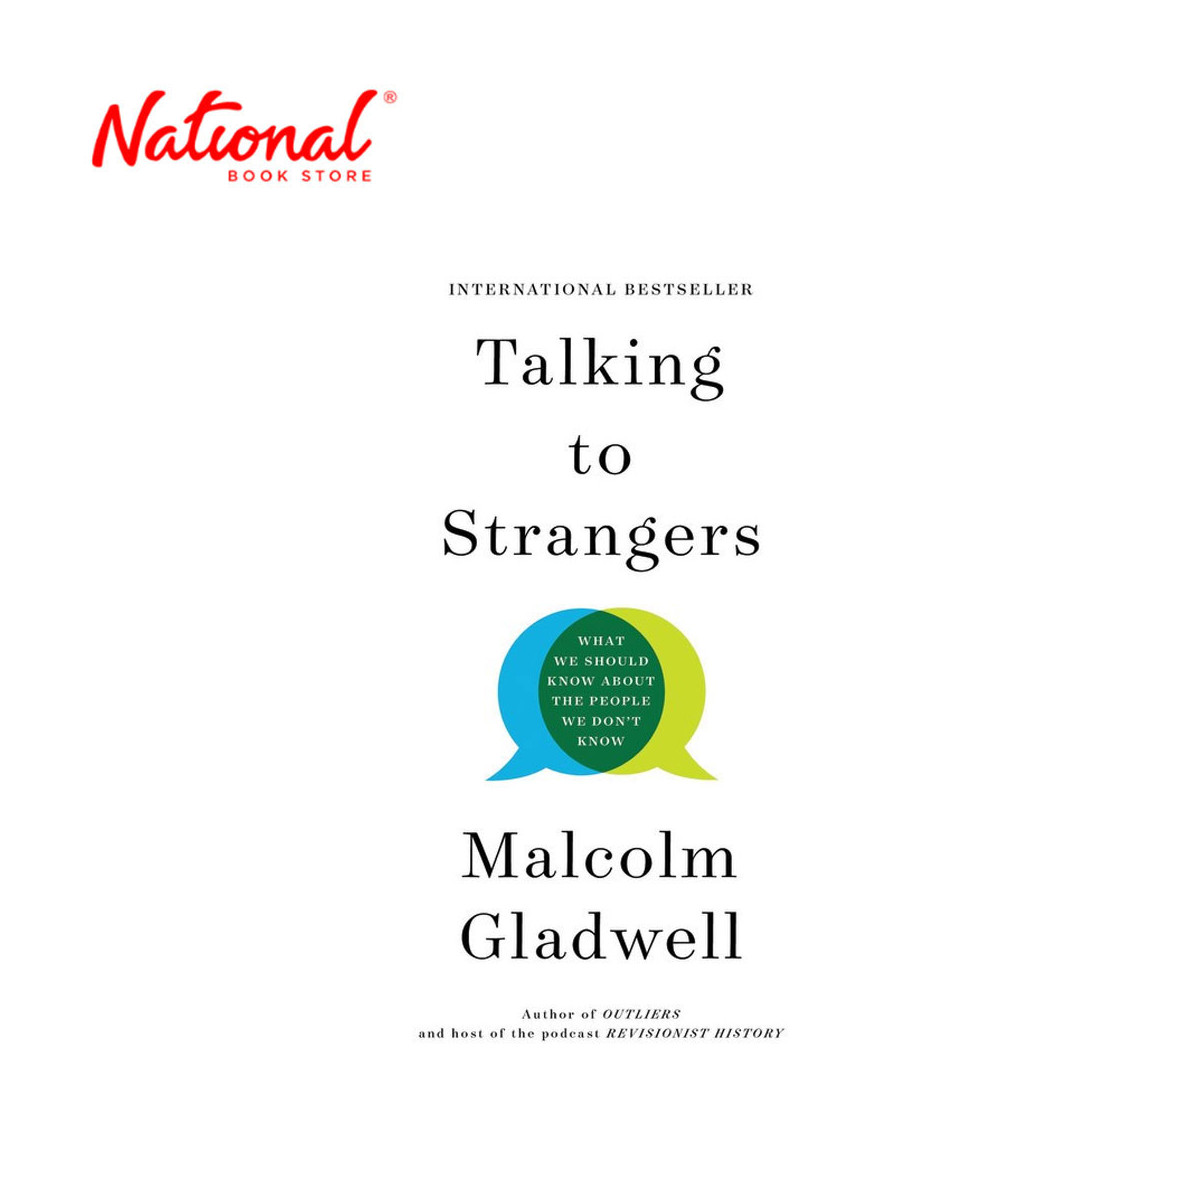 Talking to Strangers by Malcolm Gladwell Mass Market - Psychology & Self-Help